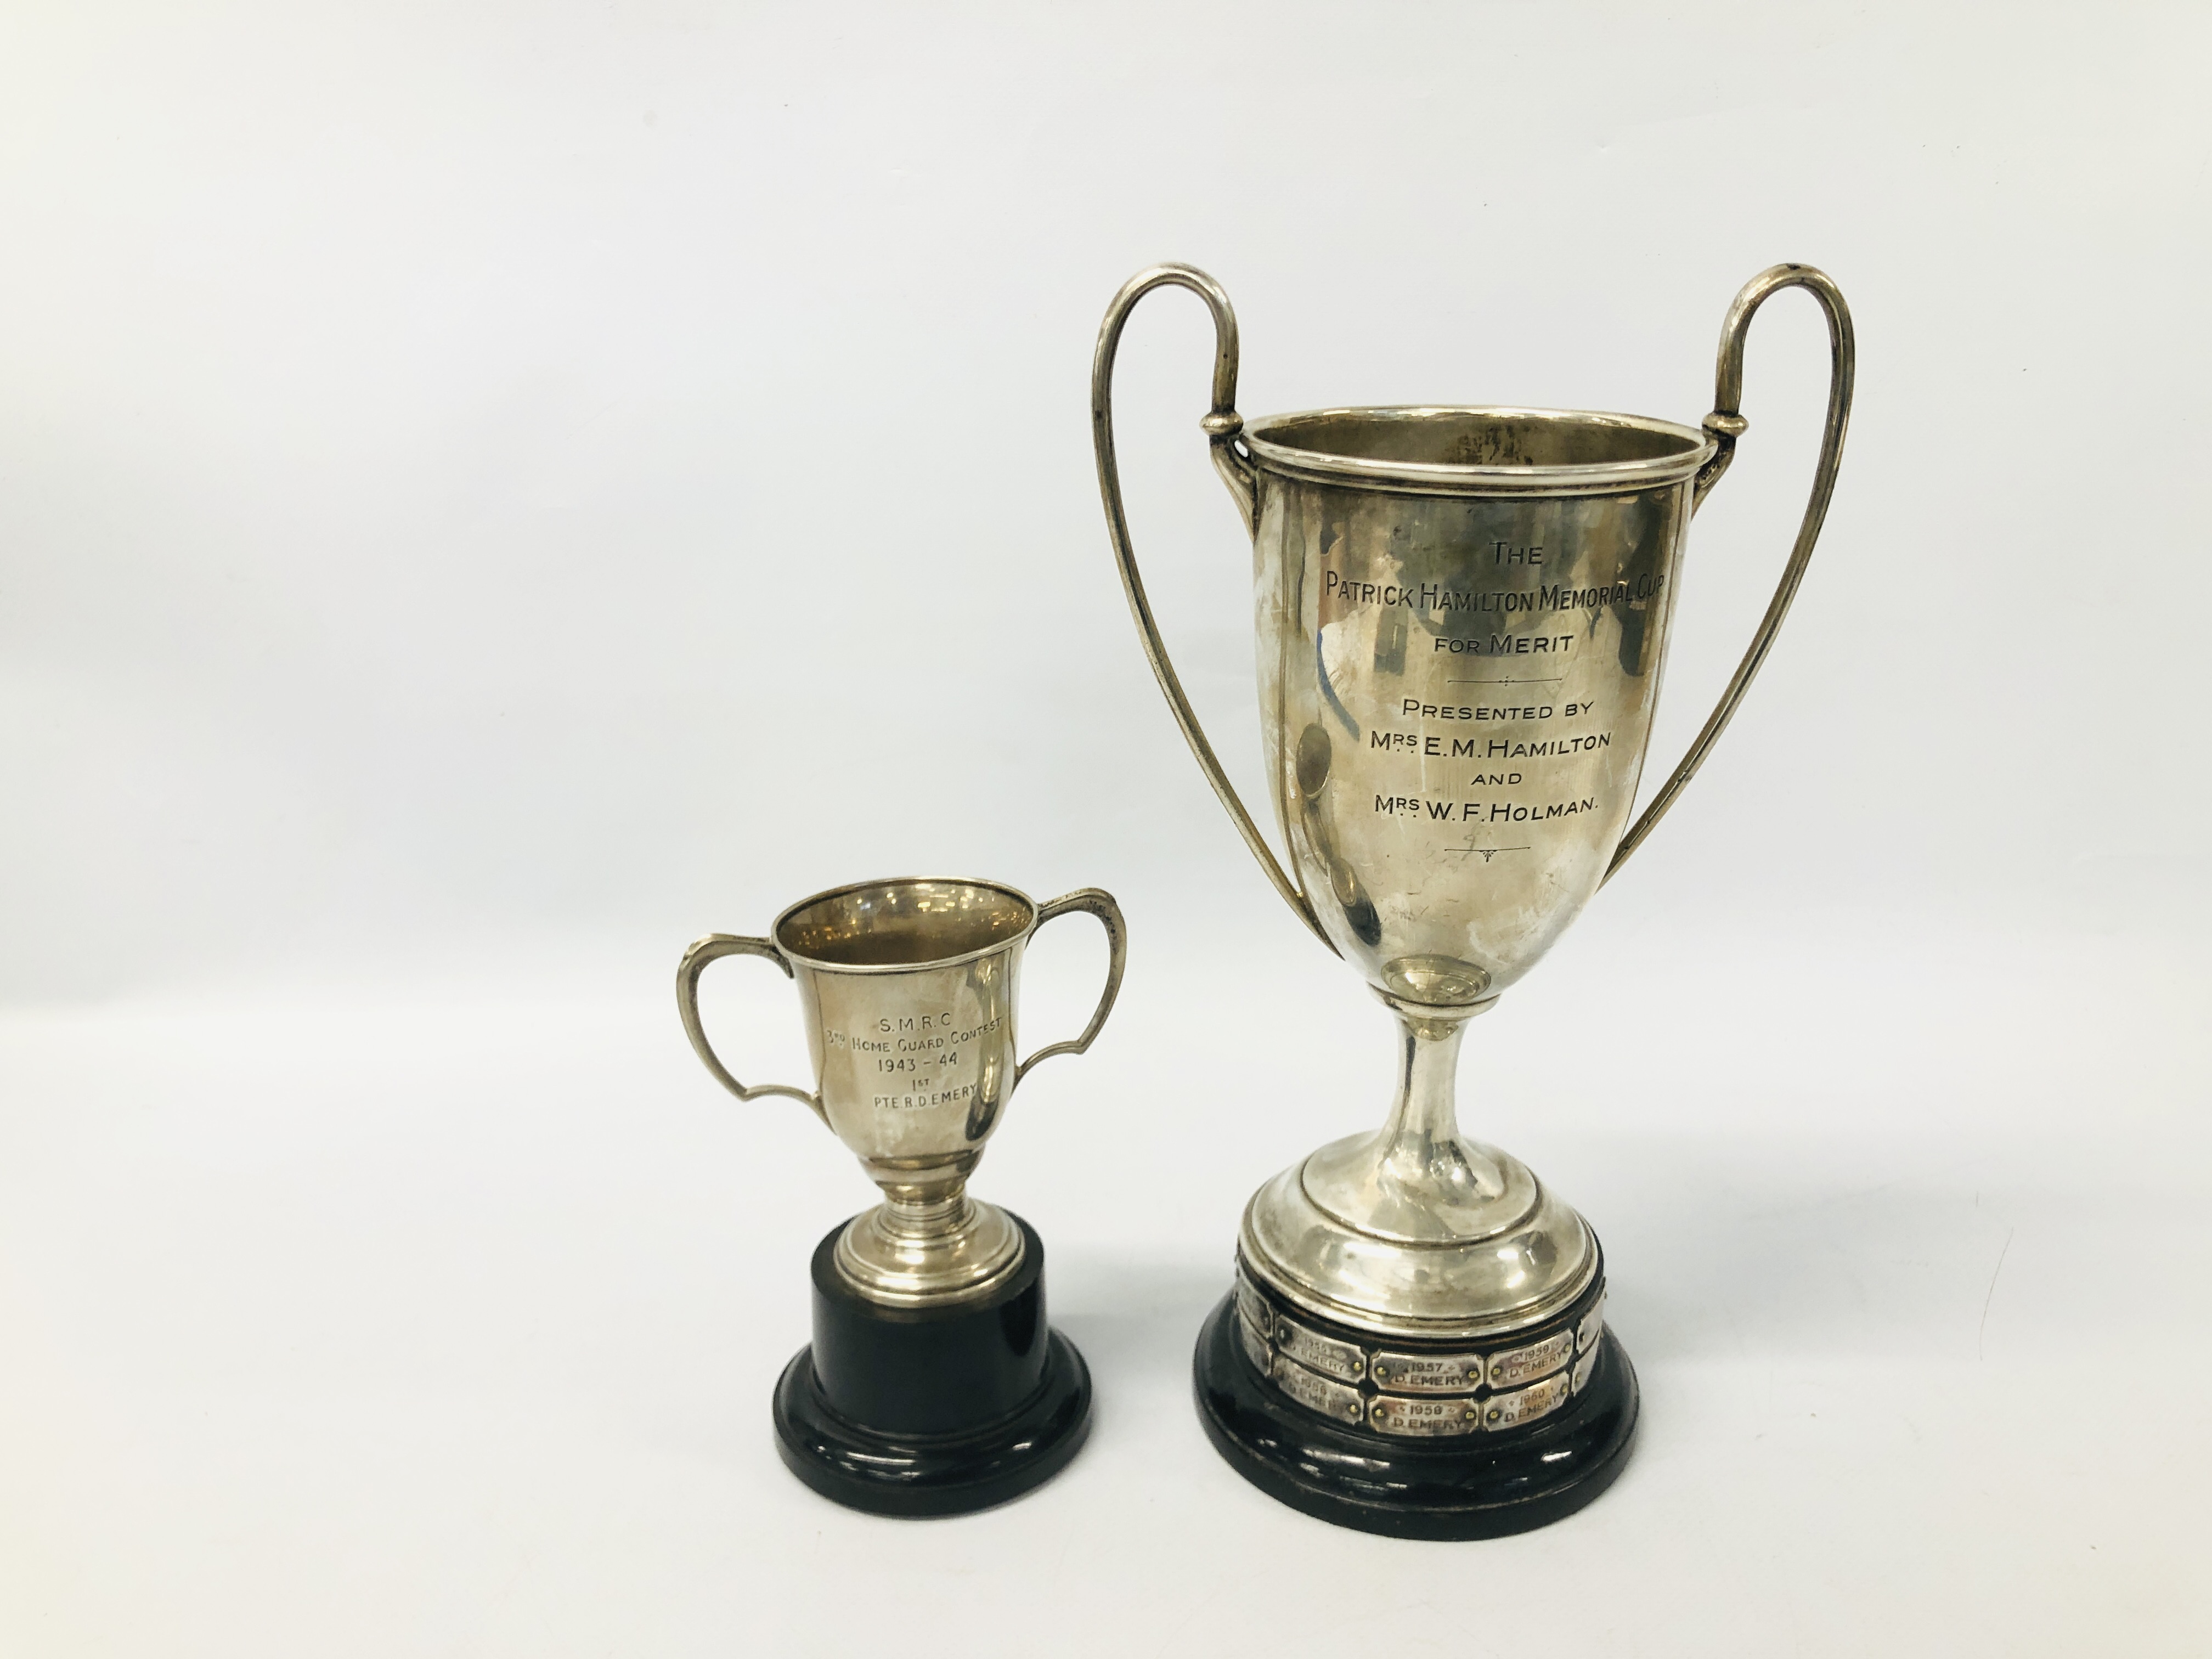 AN ANTIQUE TWO HANDLED SILVER PRESENTATION CUP BEARING INSCRIPTION RELATING TO THE PLATOON